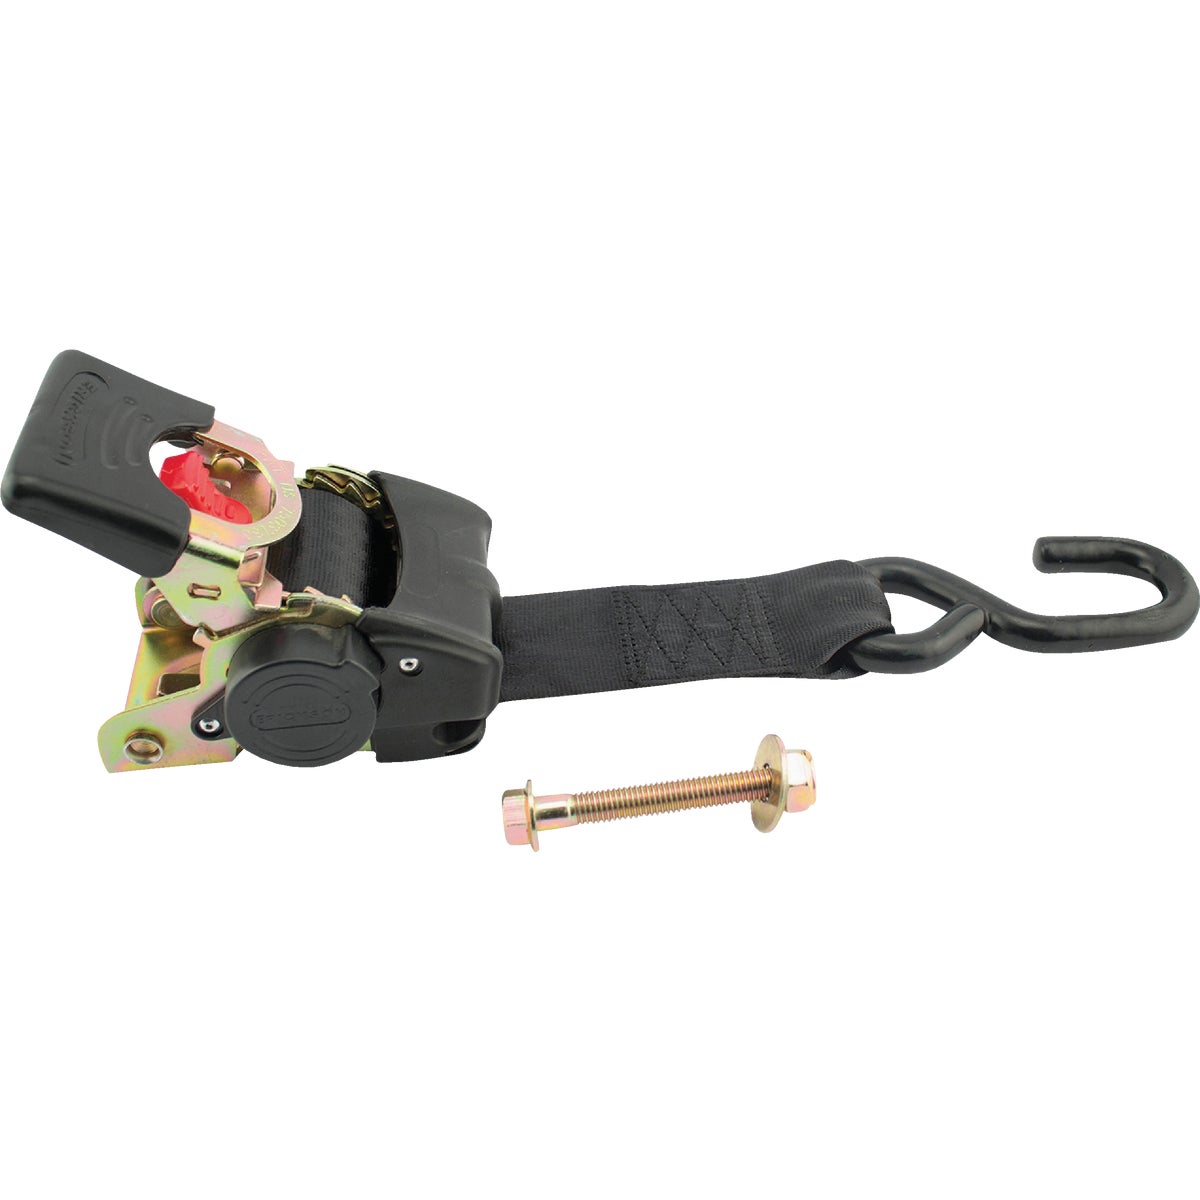 Item 571490, Bolt-on permanent mount ratchet strap. Bolts included for mounting.